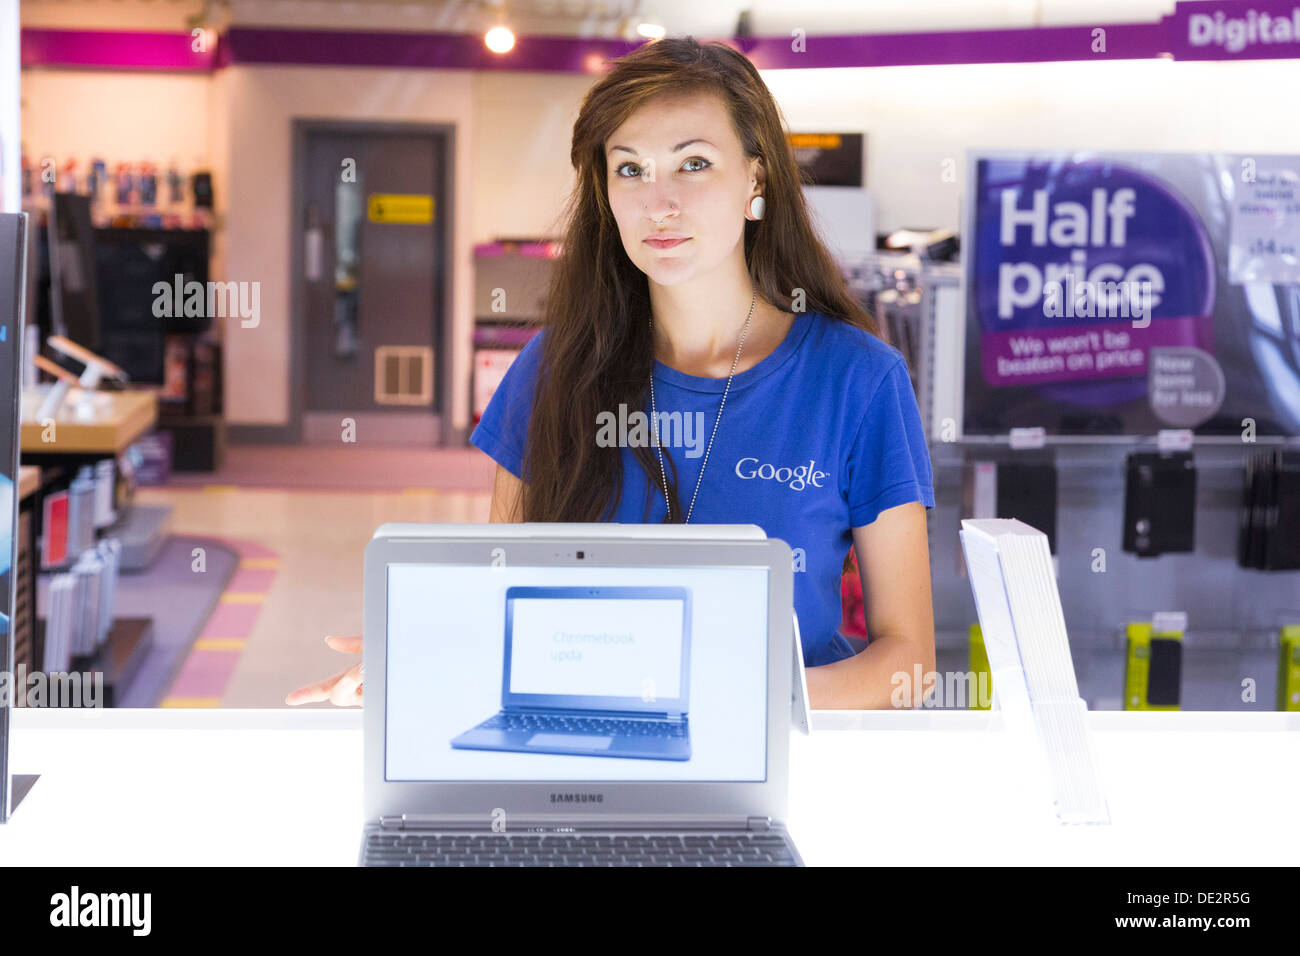 Google specialist at a computer store  demonstrating a Google Chromebook based laptop computer Stock Photo